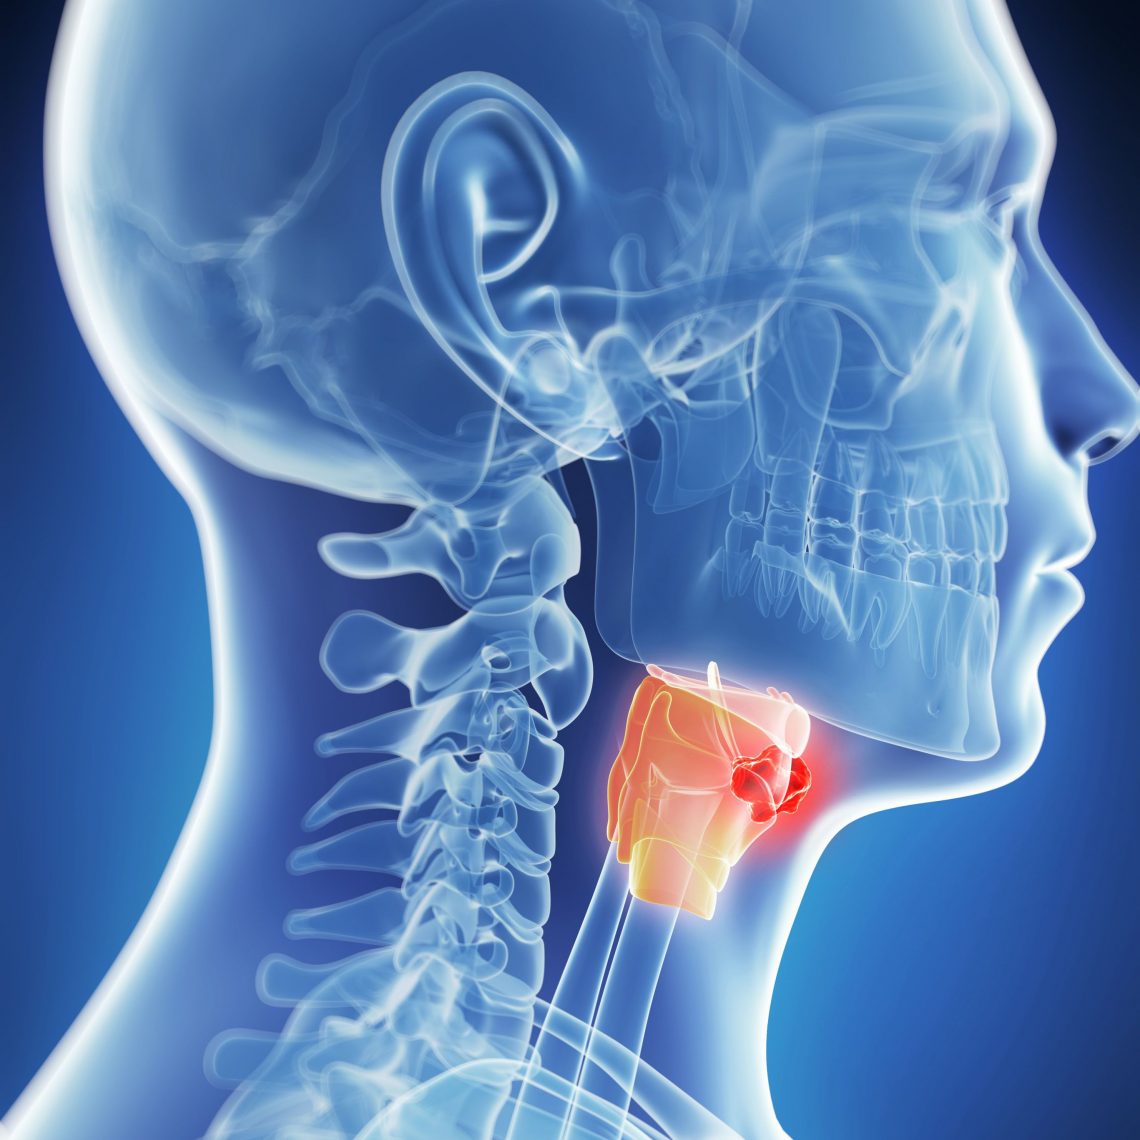 Laryngeal Cancer Diagnosis and Treatment in Thailand